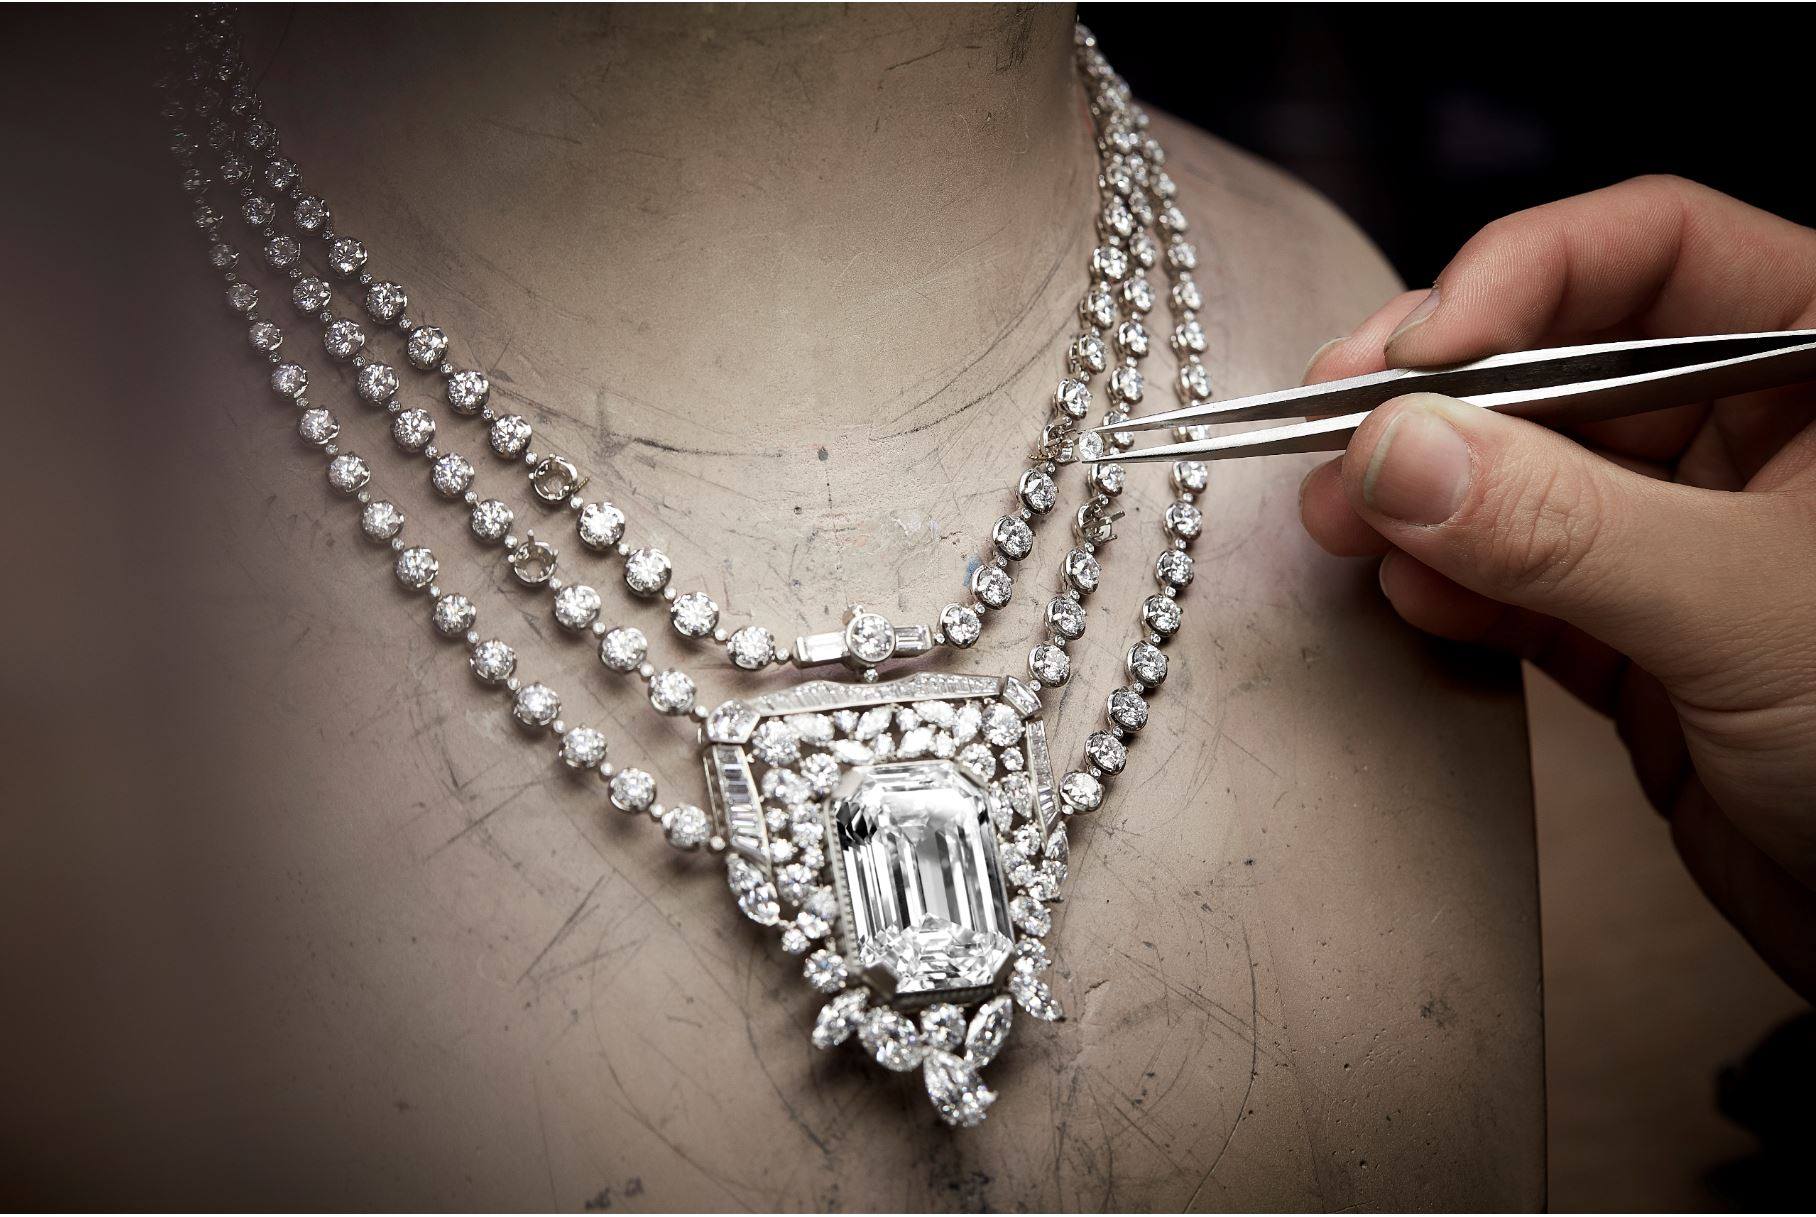 From Chanel No. 5 to the 55.55 high jewellery diamond necklace